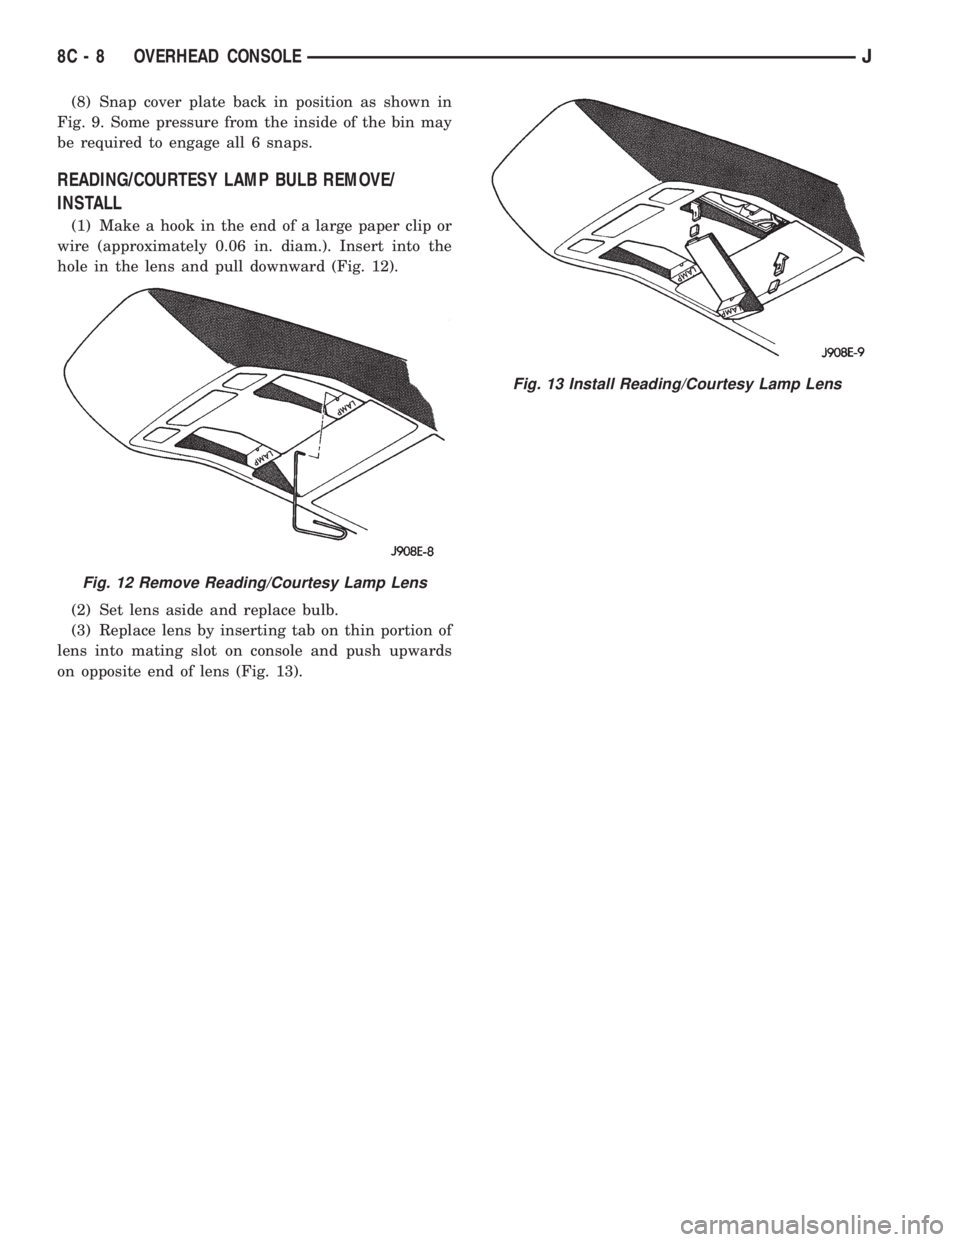 JEEP XJ 1995  Service And Repair Manual (8) Snap cover plate back in position as shown in
Fig. 9. Some pressure from the inside of the bin may
be required to engage all 6 snaps.
READING/COURTESY LAMP BULB REMOVE/
INSTALL
(1) Make a hook in 